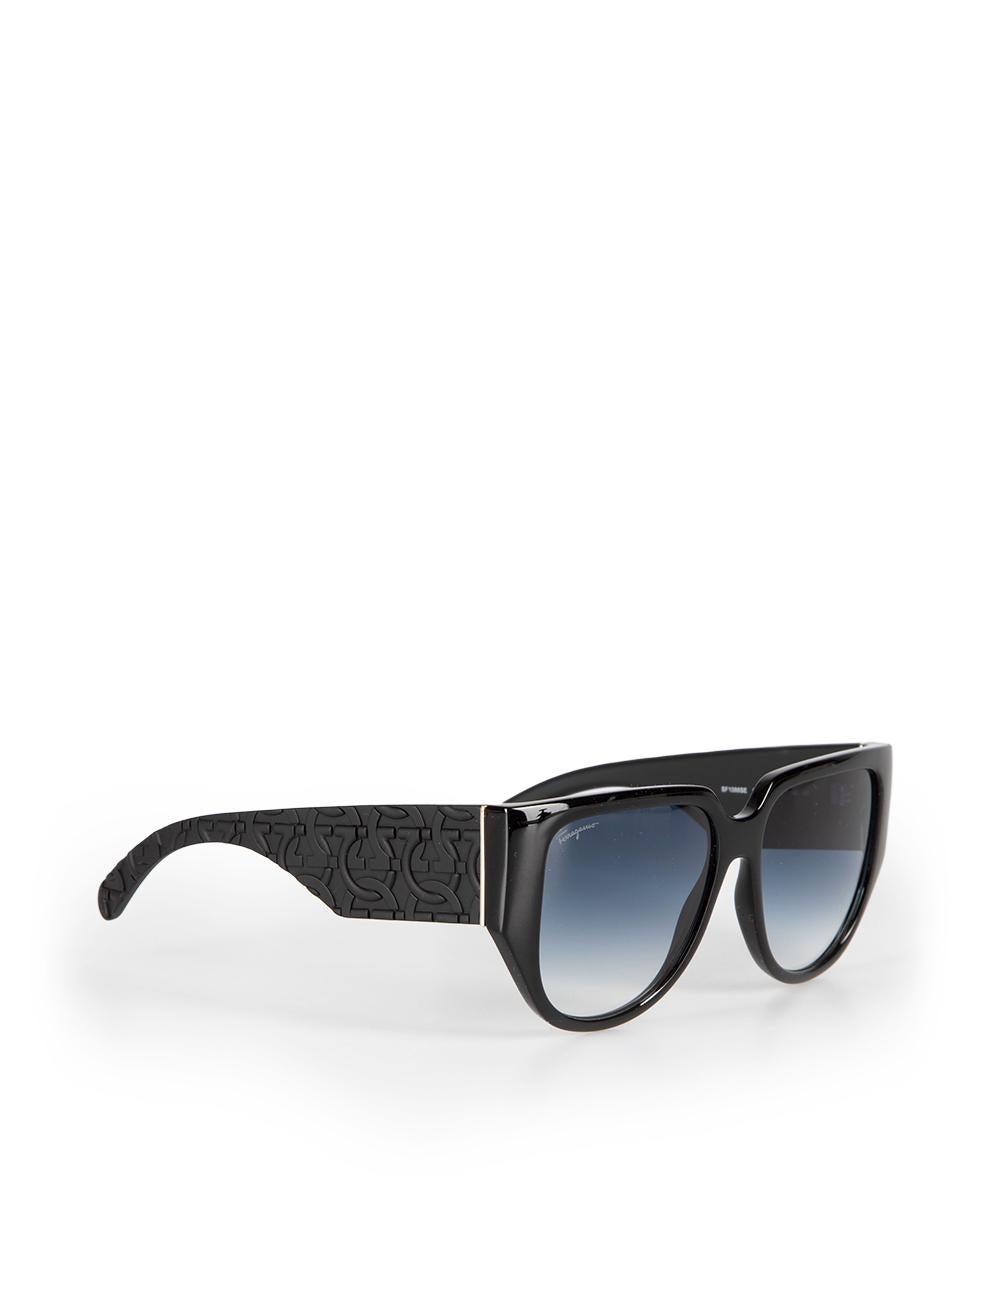 CONDITION is New with tags on this brand new Salvatore Ferragamo designer item. This item comes with original packaging.
 
 
 
 Details
 
 
 Model: SF1088SE
 
 Black
 
 Plastic
 
 Browline Square Sunglasses
 
 Blue Gradient Lens
 
 Full-Rim
 
 100%